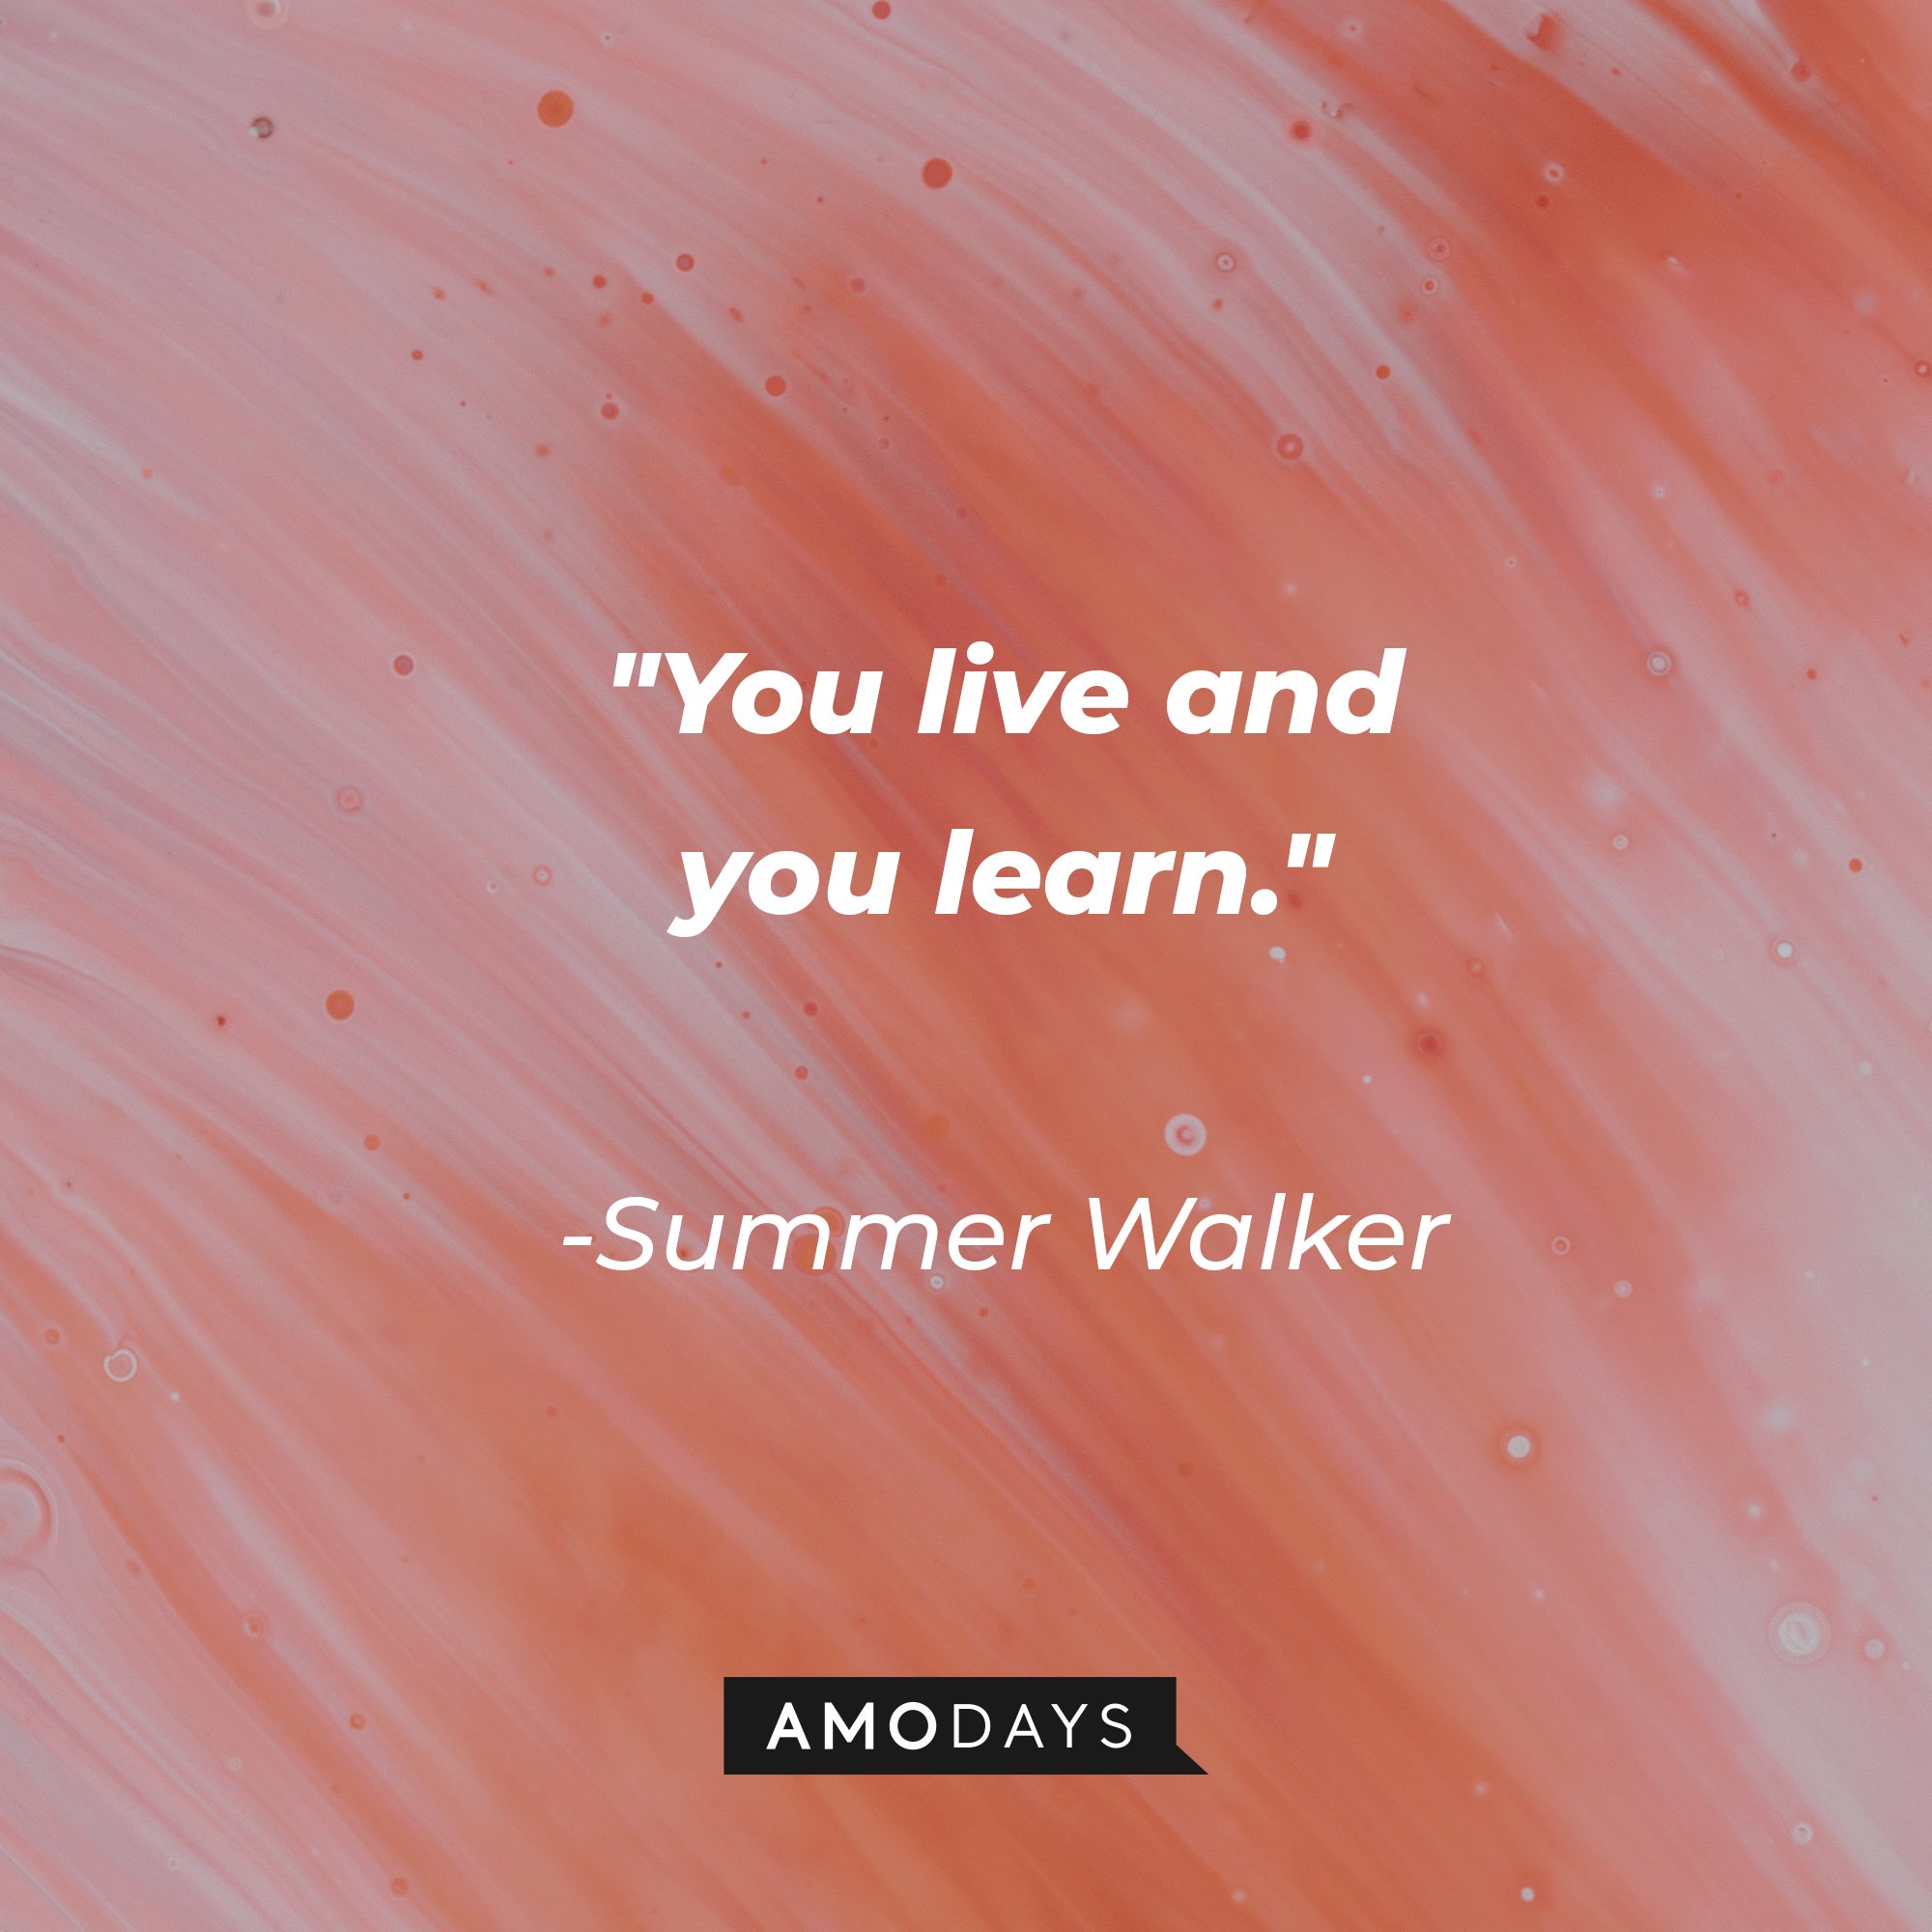 Summer Walker's quote: "You live and you learn." | Image: AmoDays